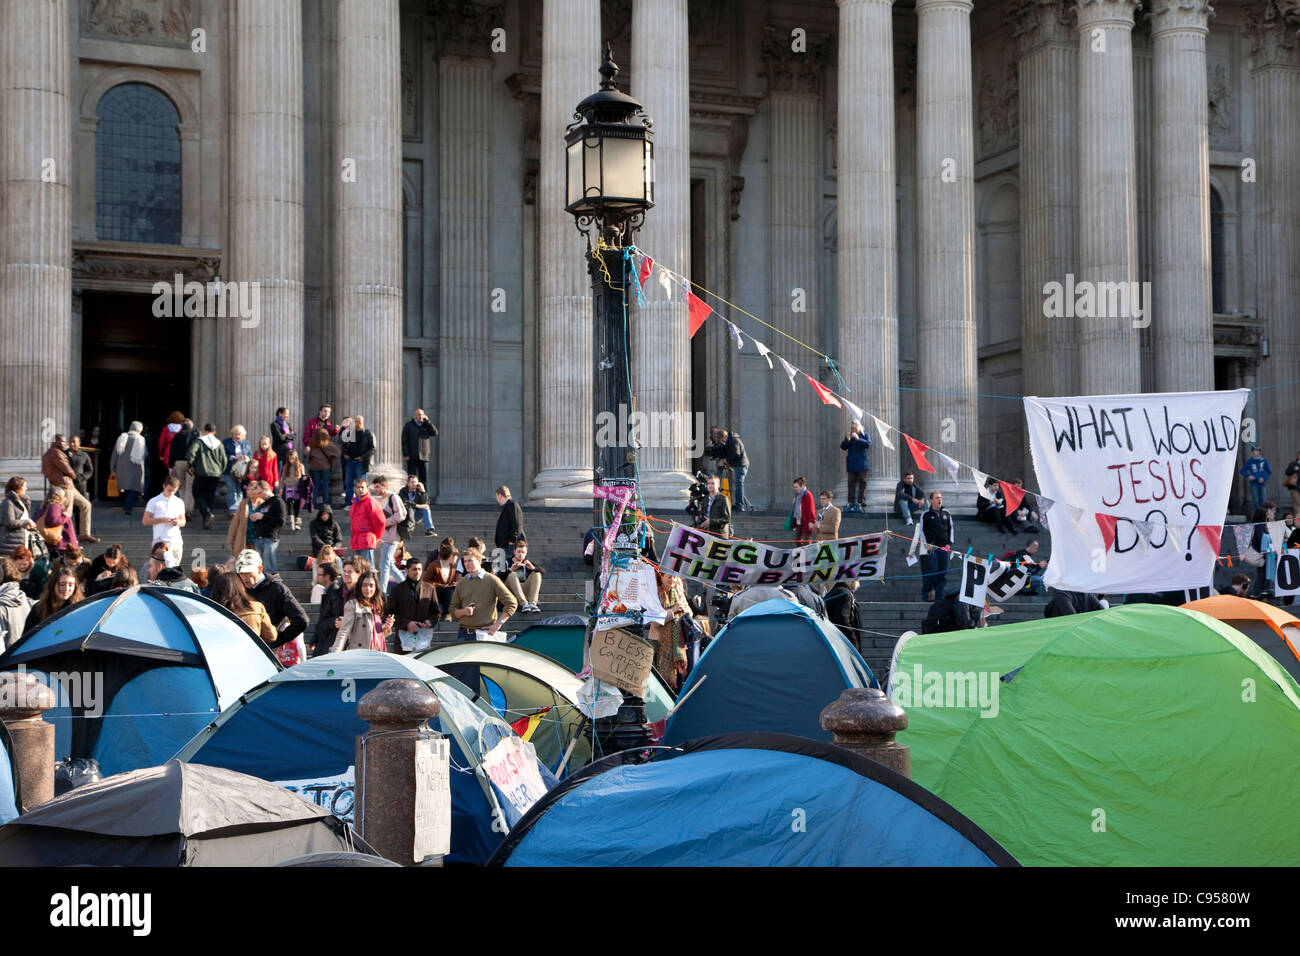 Occupy London anti-capitalism protest camp outside St Paul's Cathedral, London Stock Photo